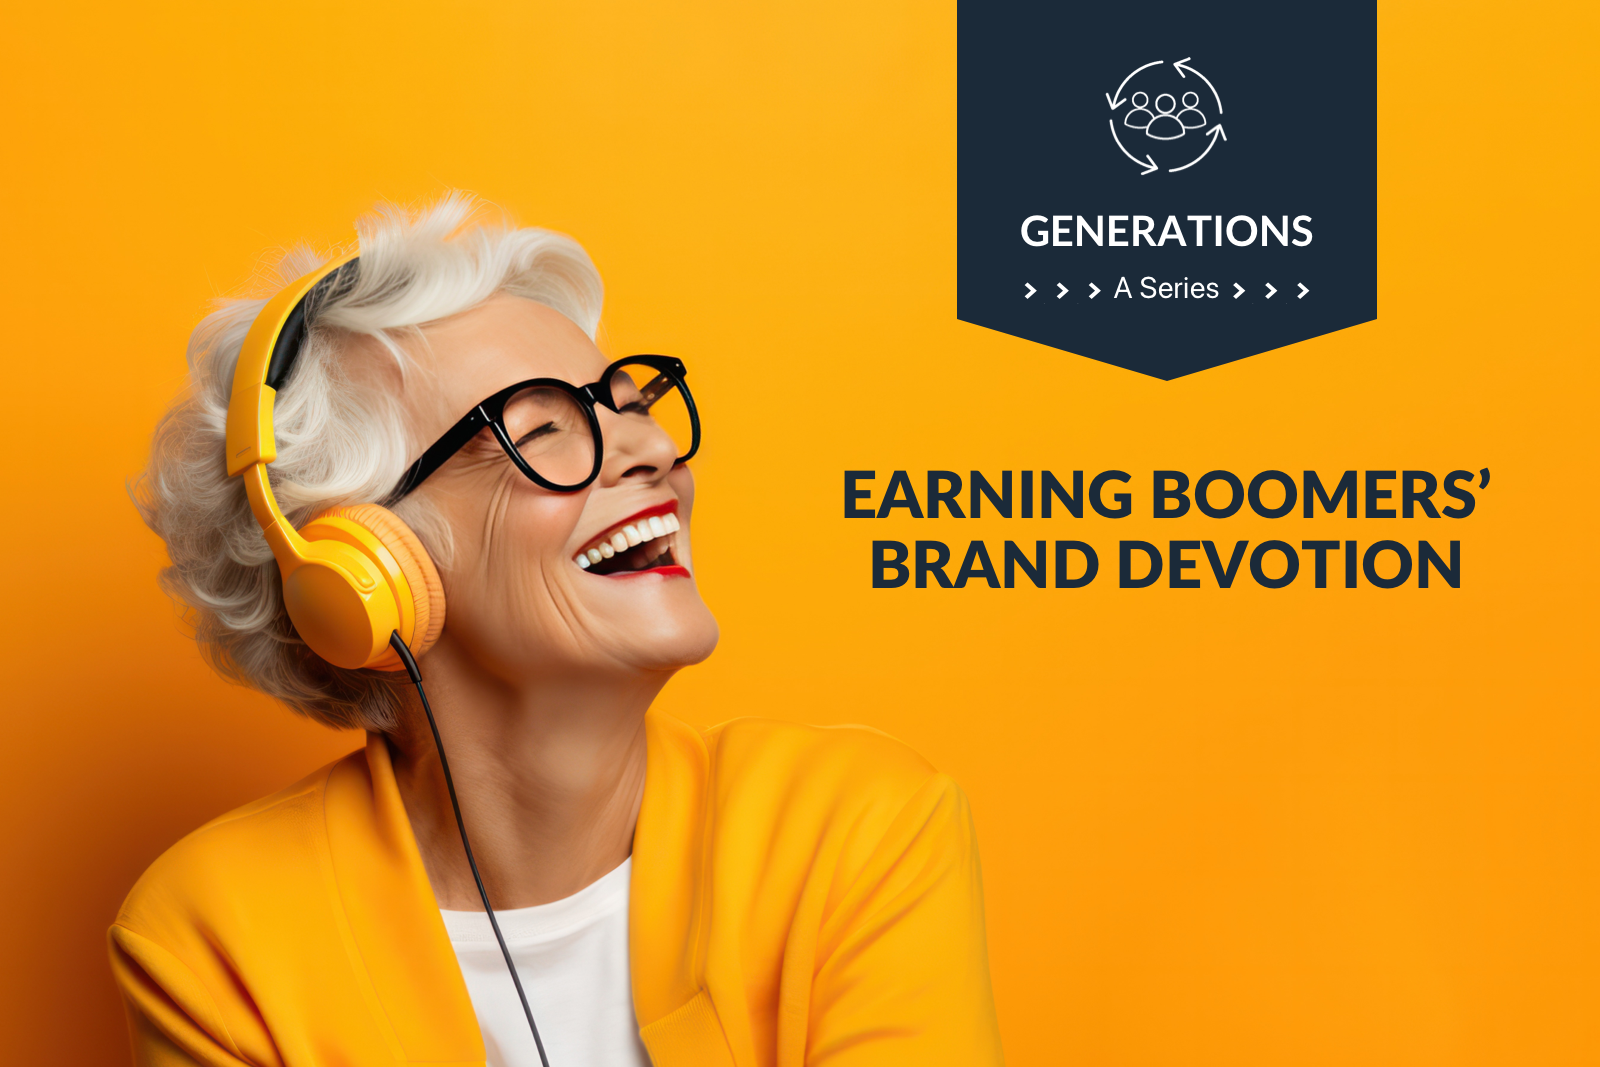 Generations: Earning Boomers' Brand Devotion Article Featured Image